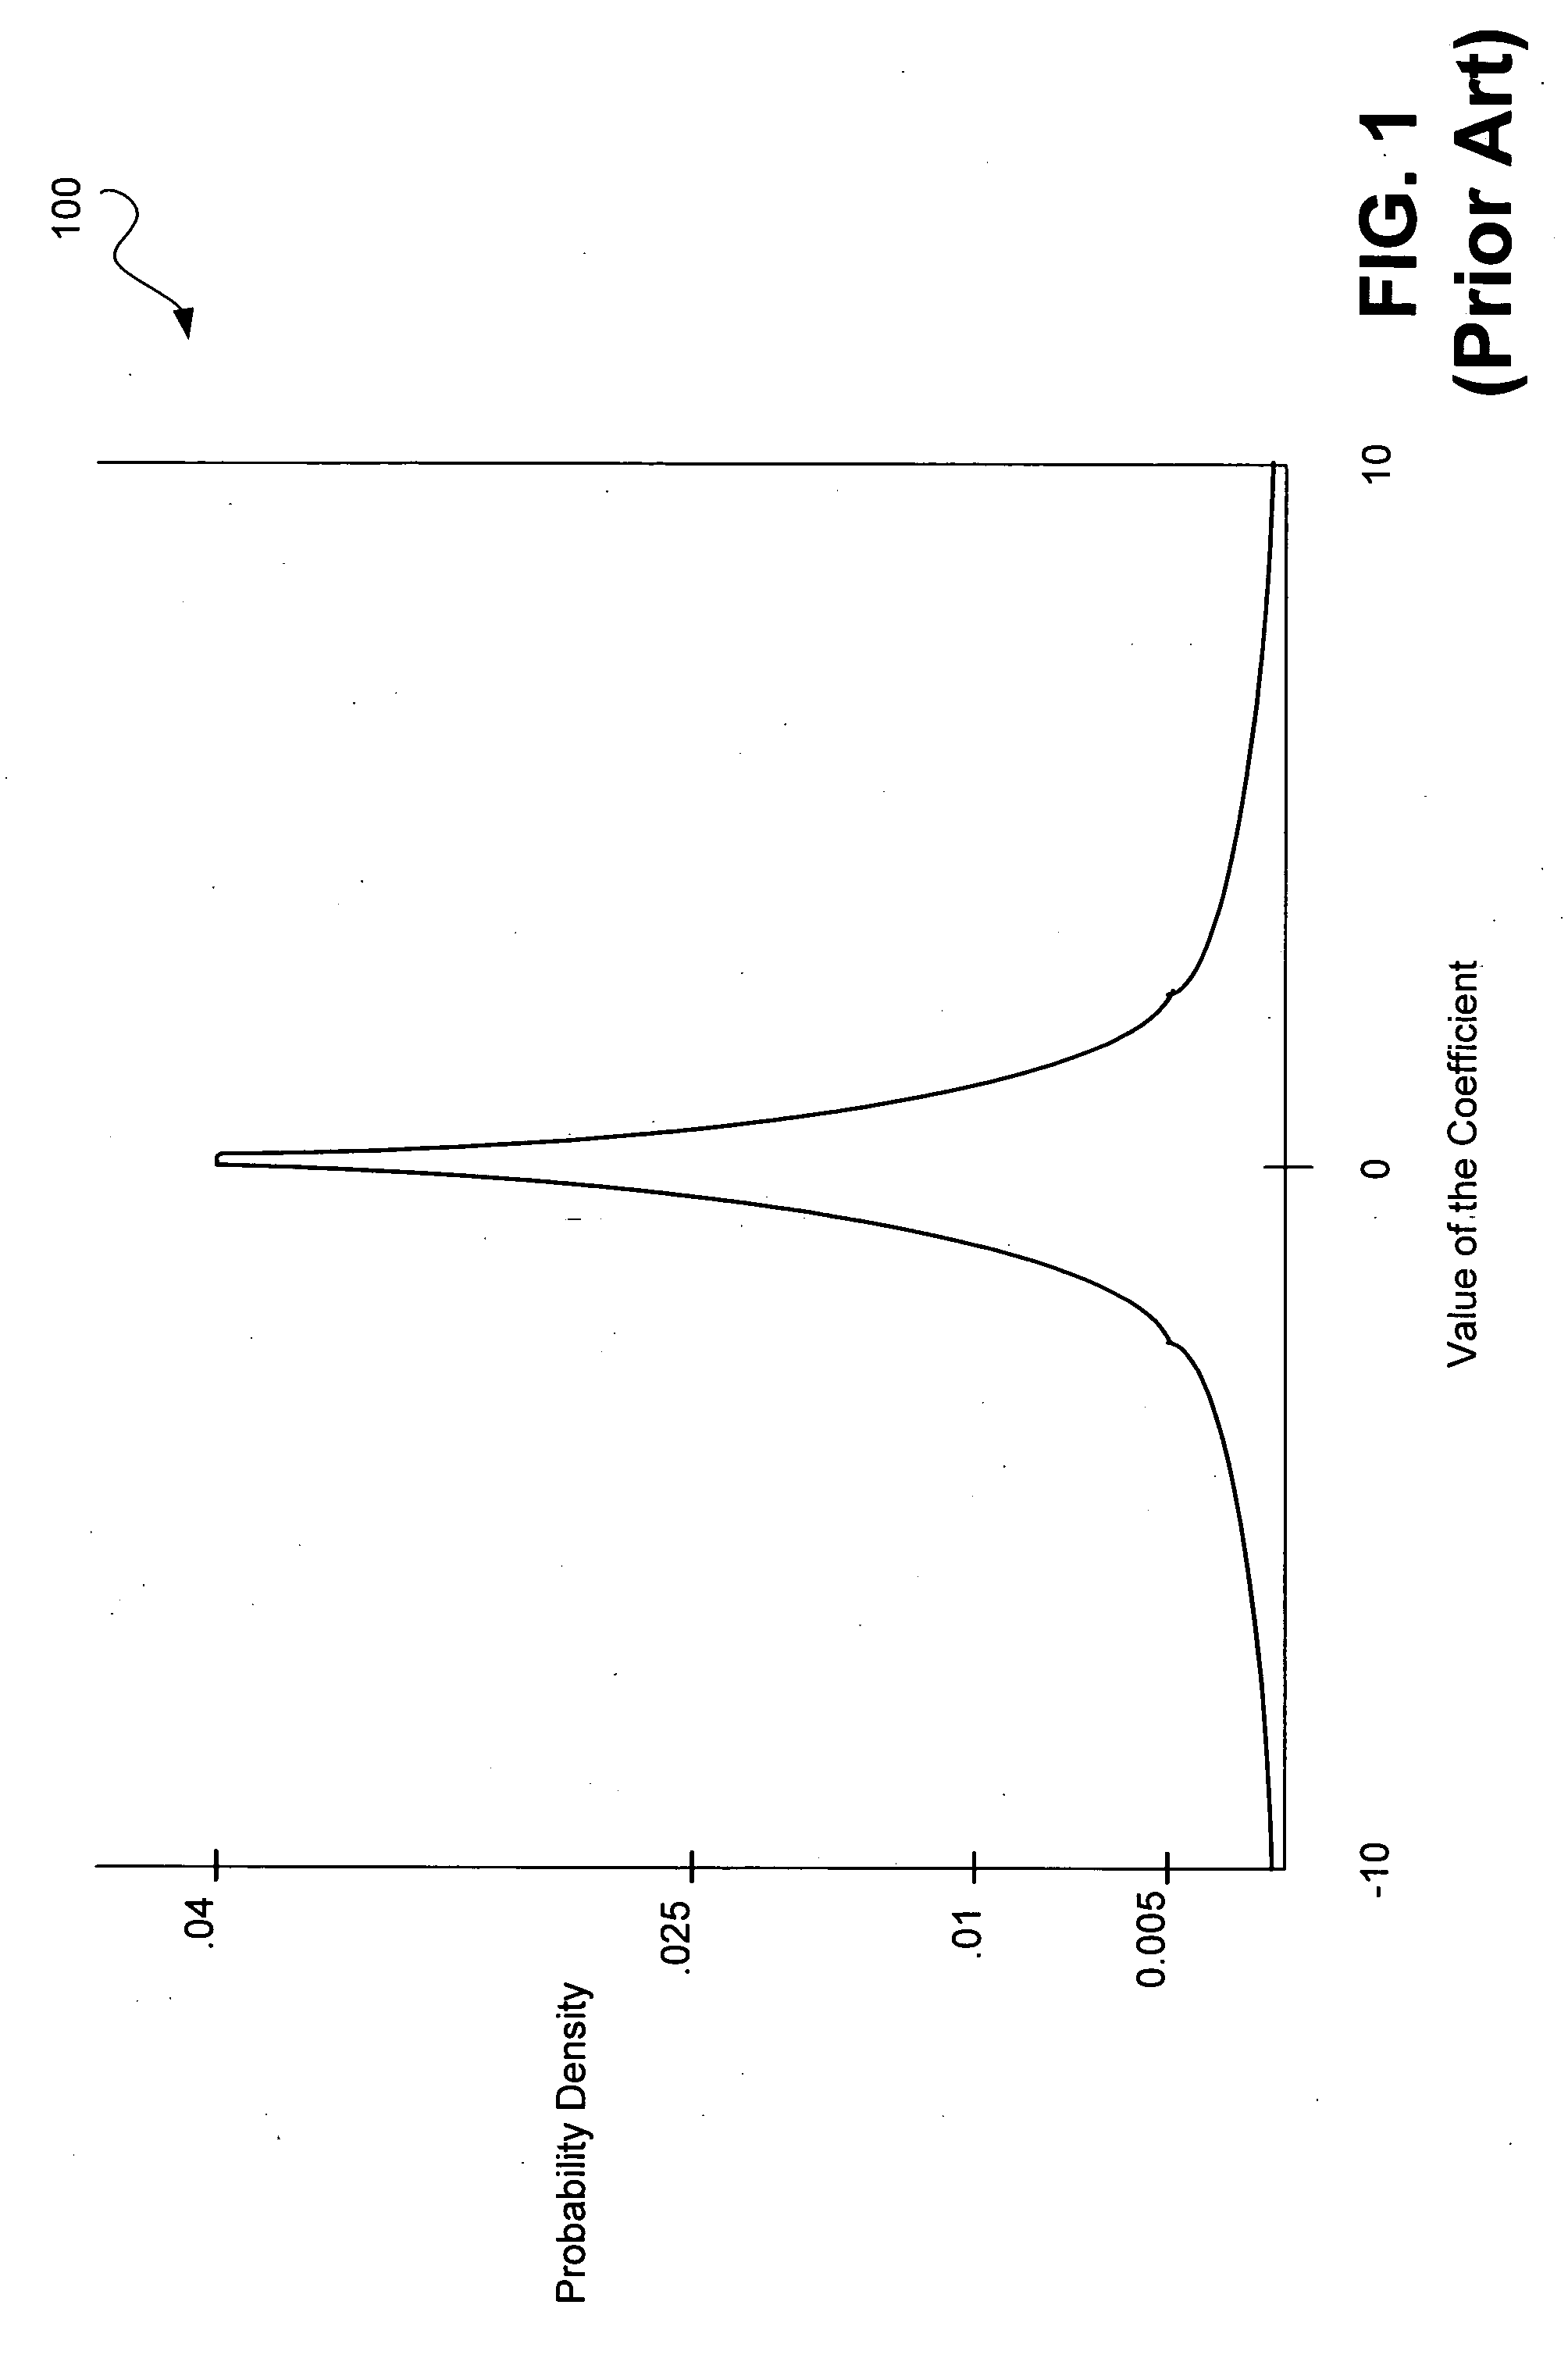 Cauchy-distribution based coding system and method